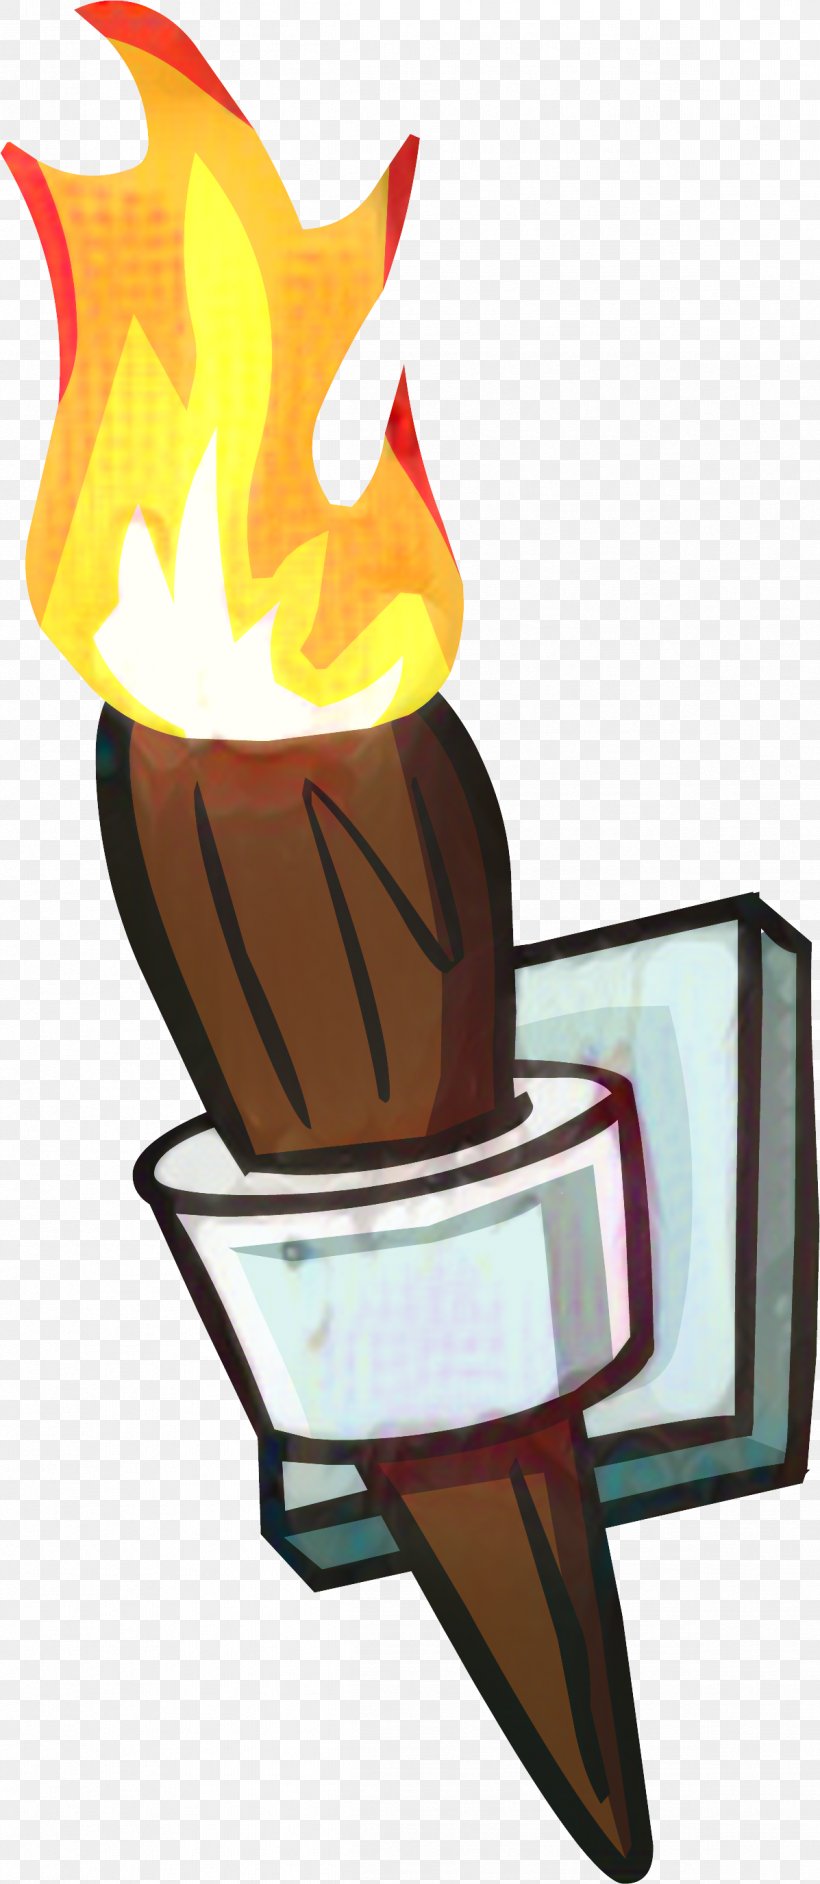 Clip Art Transparency Torch Vector Graphics, PNG, 1197x2751px, Torch, Fire, Flame, Flashlight, Sconce Download Free